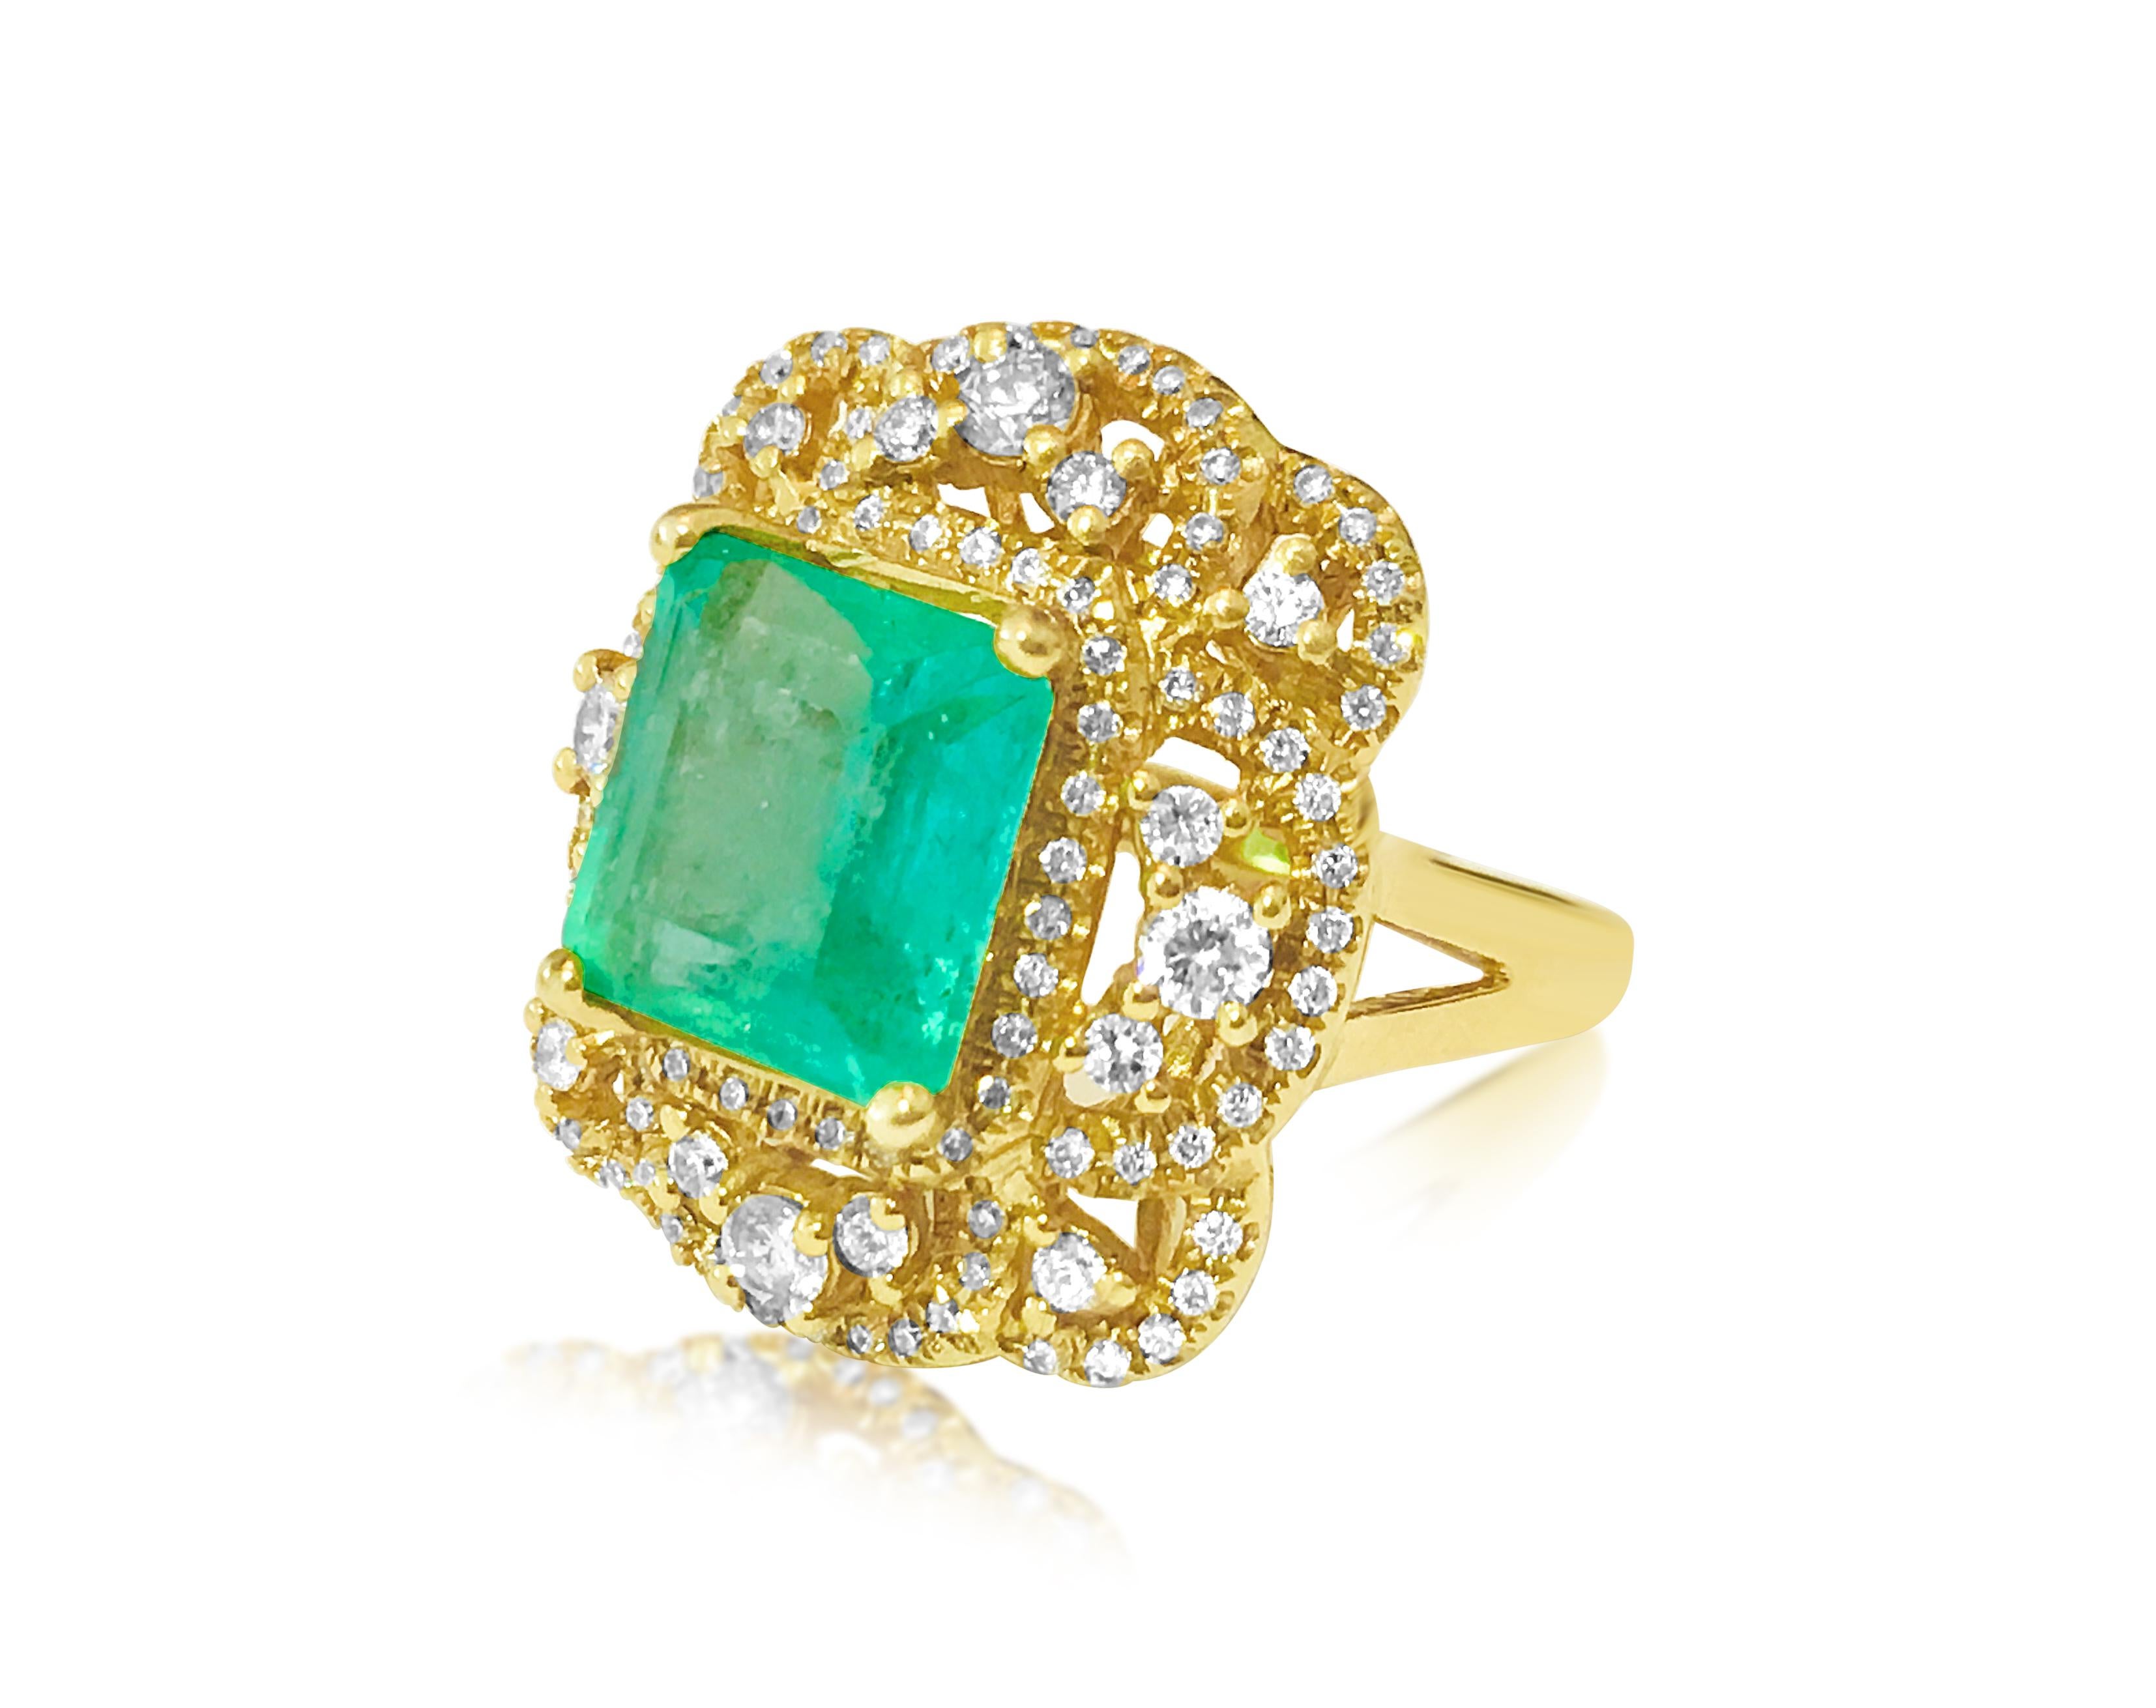 Emerald Cut 18k Gold Vintage 6 ct Emerald Diamond Cocktail Ring For Sale